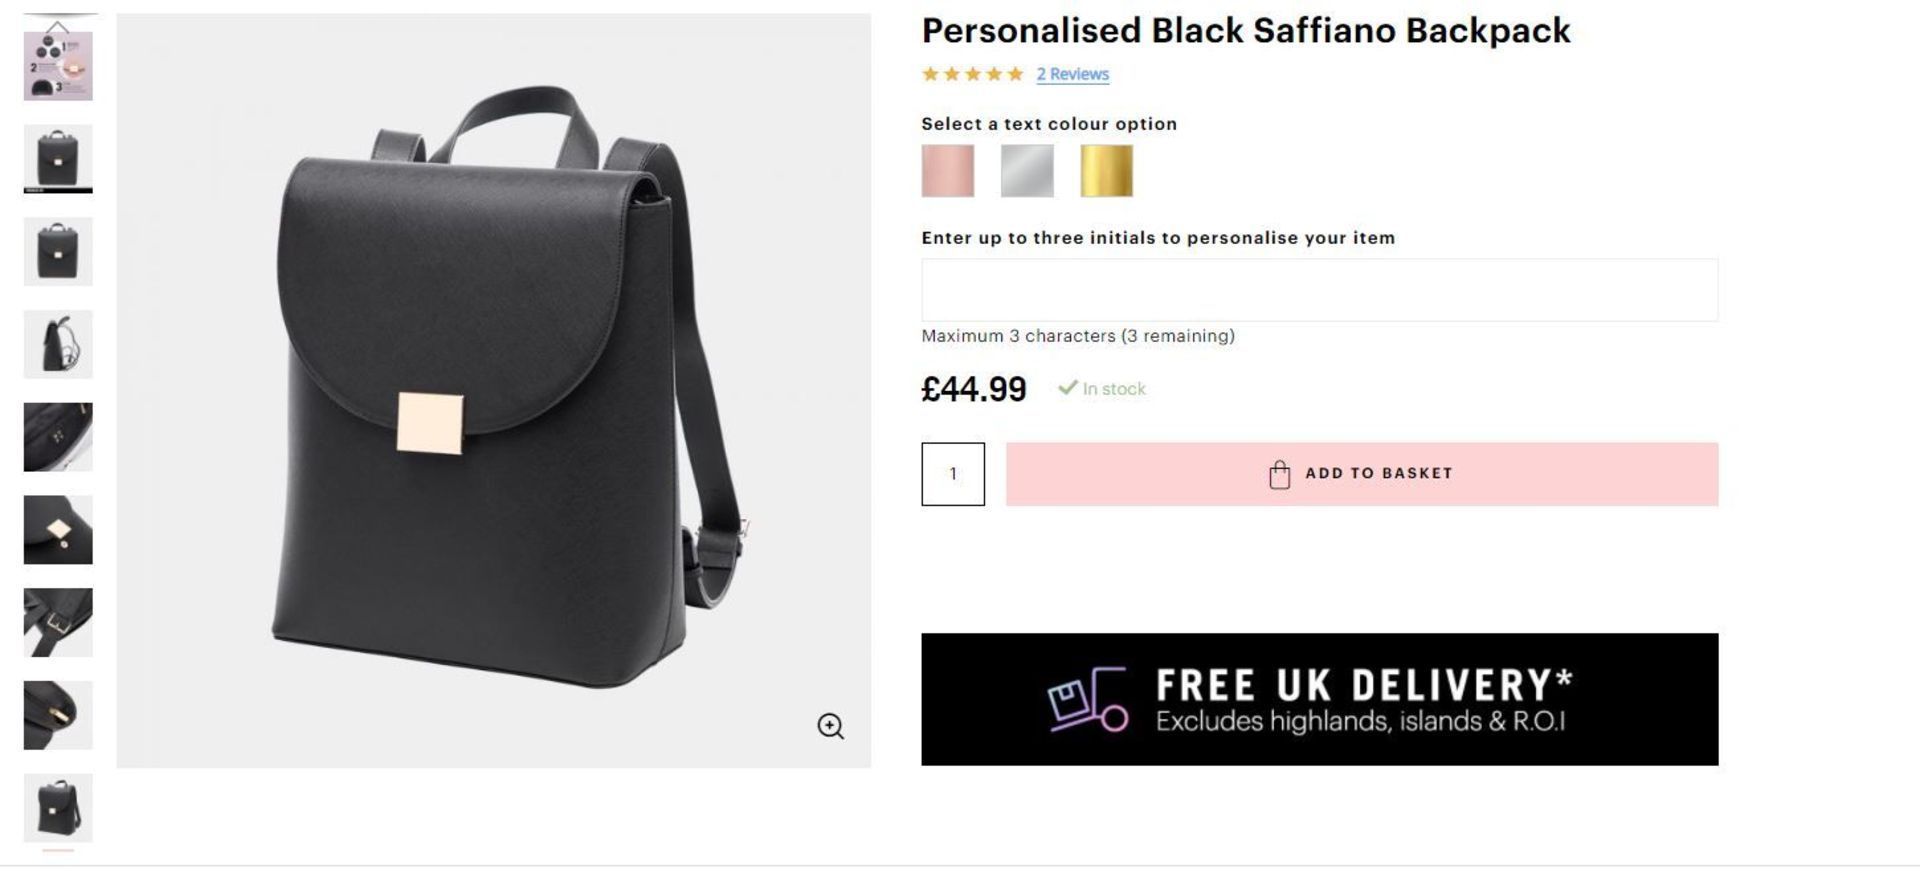 4 x NEW PACKAGED Beauti Saffiano Backpack - Black. RRP £49.99 each. Note: Item is not personalised. - Image 2 of 3